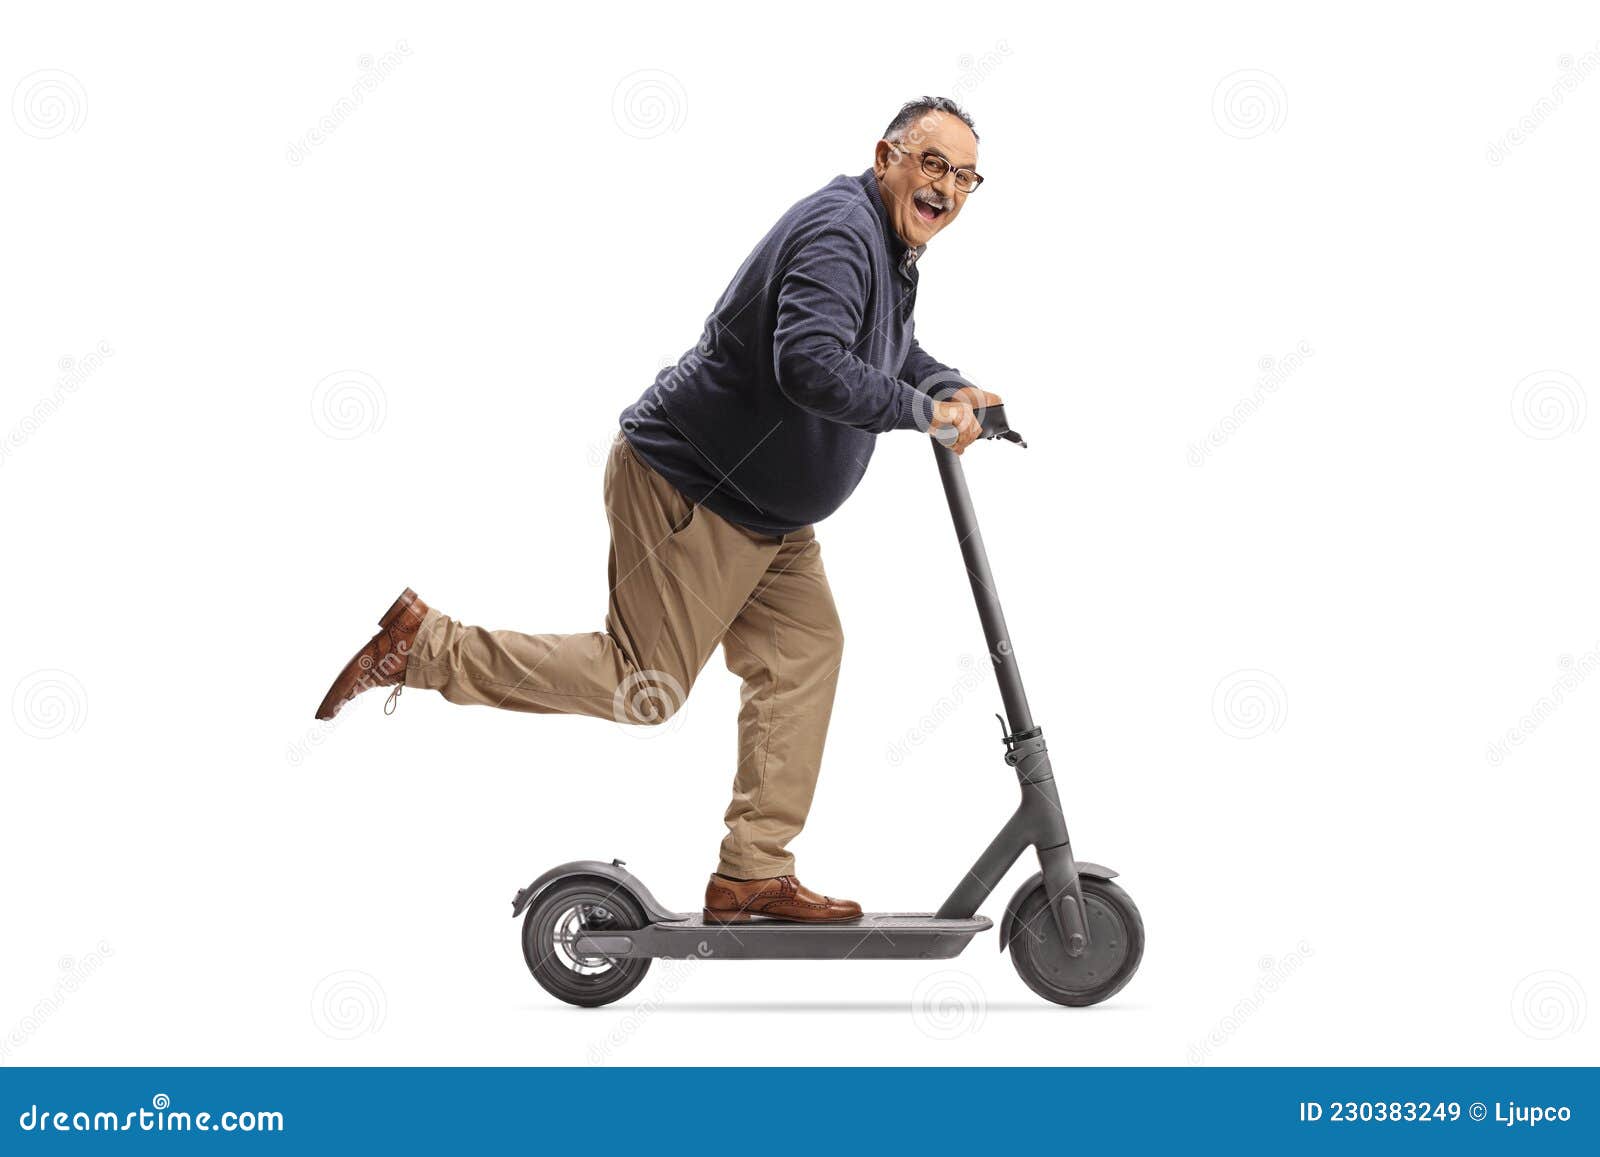 finansiere blæk Latter Funny Mature Man Riding an Electric Scooter and Looking at Camera Stock  Image - Image of caucasian, lifestyle: 230383249